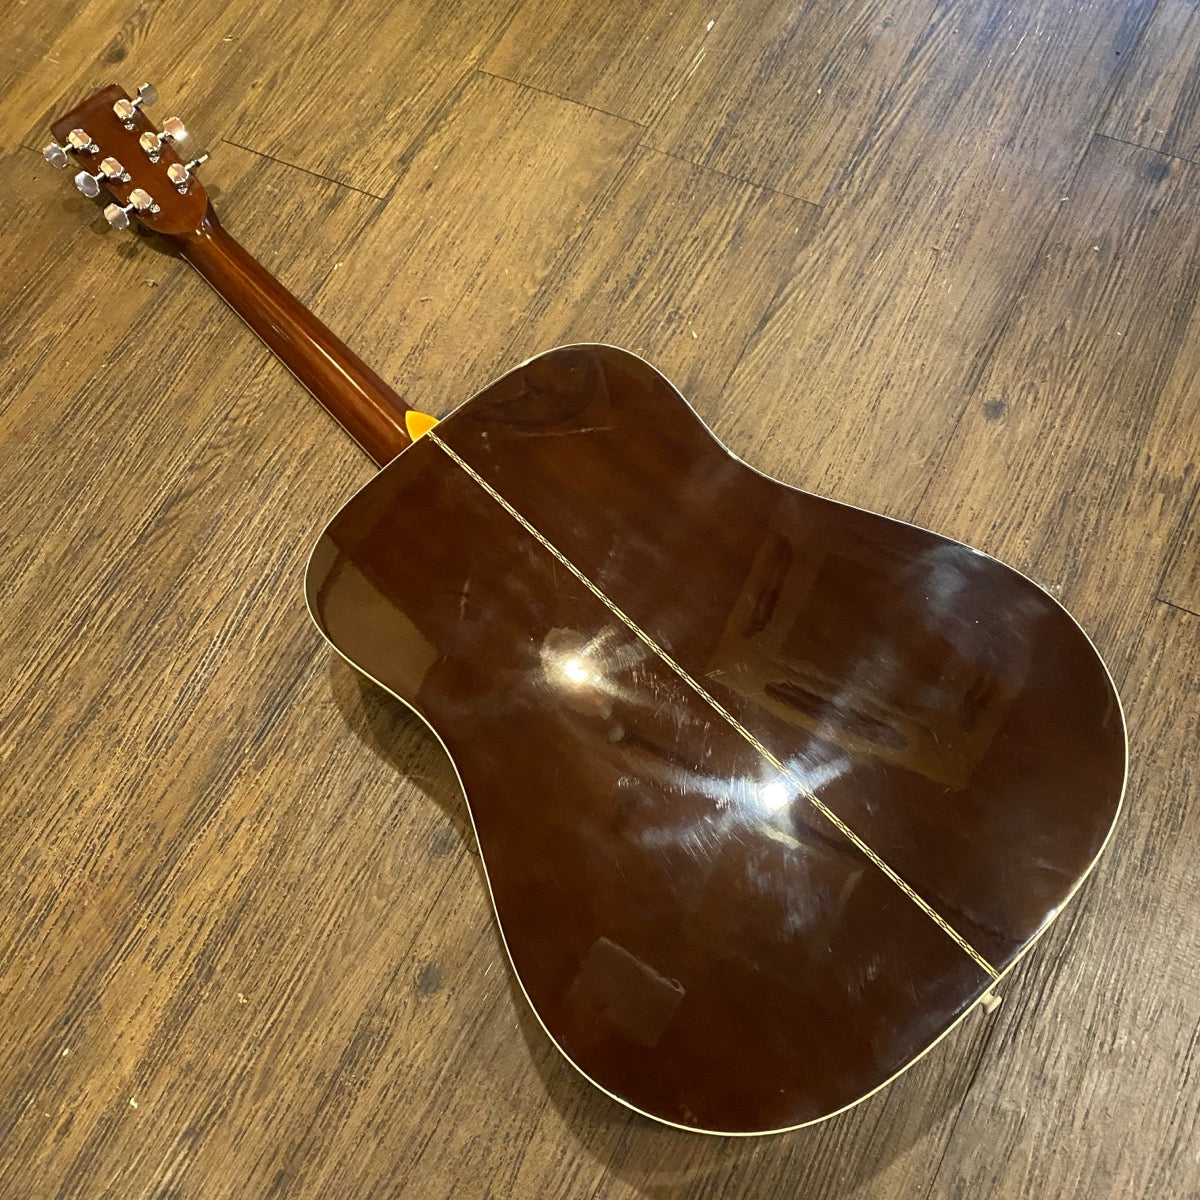 Morris W-20 Acoustic Guitar Late 1970s Made in Japan -GrunSound-w965-